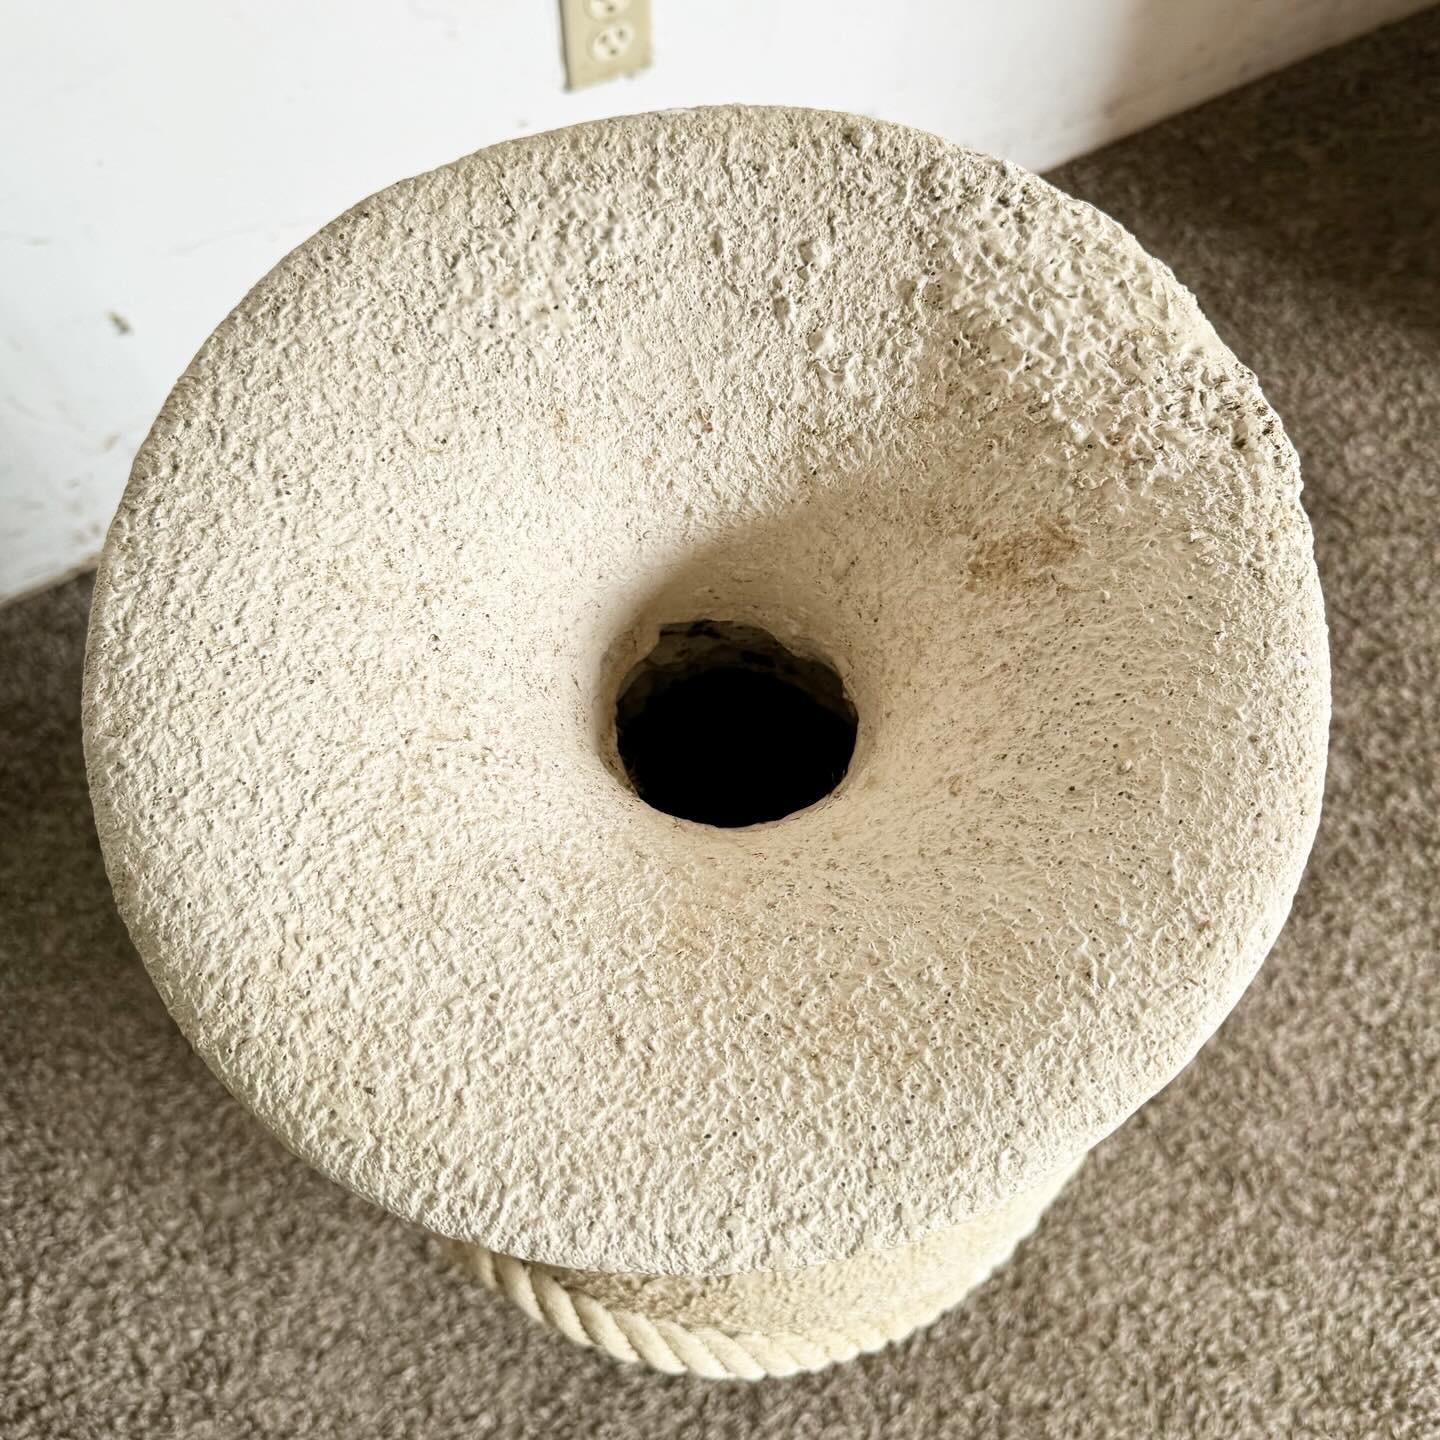 Add a touch of postmodern artistry to your space with this Faux Tessellated Stone Plaster Floor Vase, adorned with a sculpted rope design. Crafted from plaster ceramic, it mimics tessellated stone and textured rope, creating a captivating illusion.